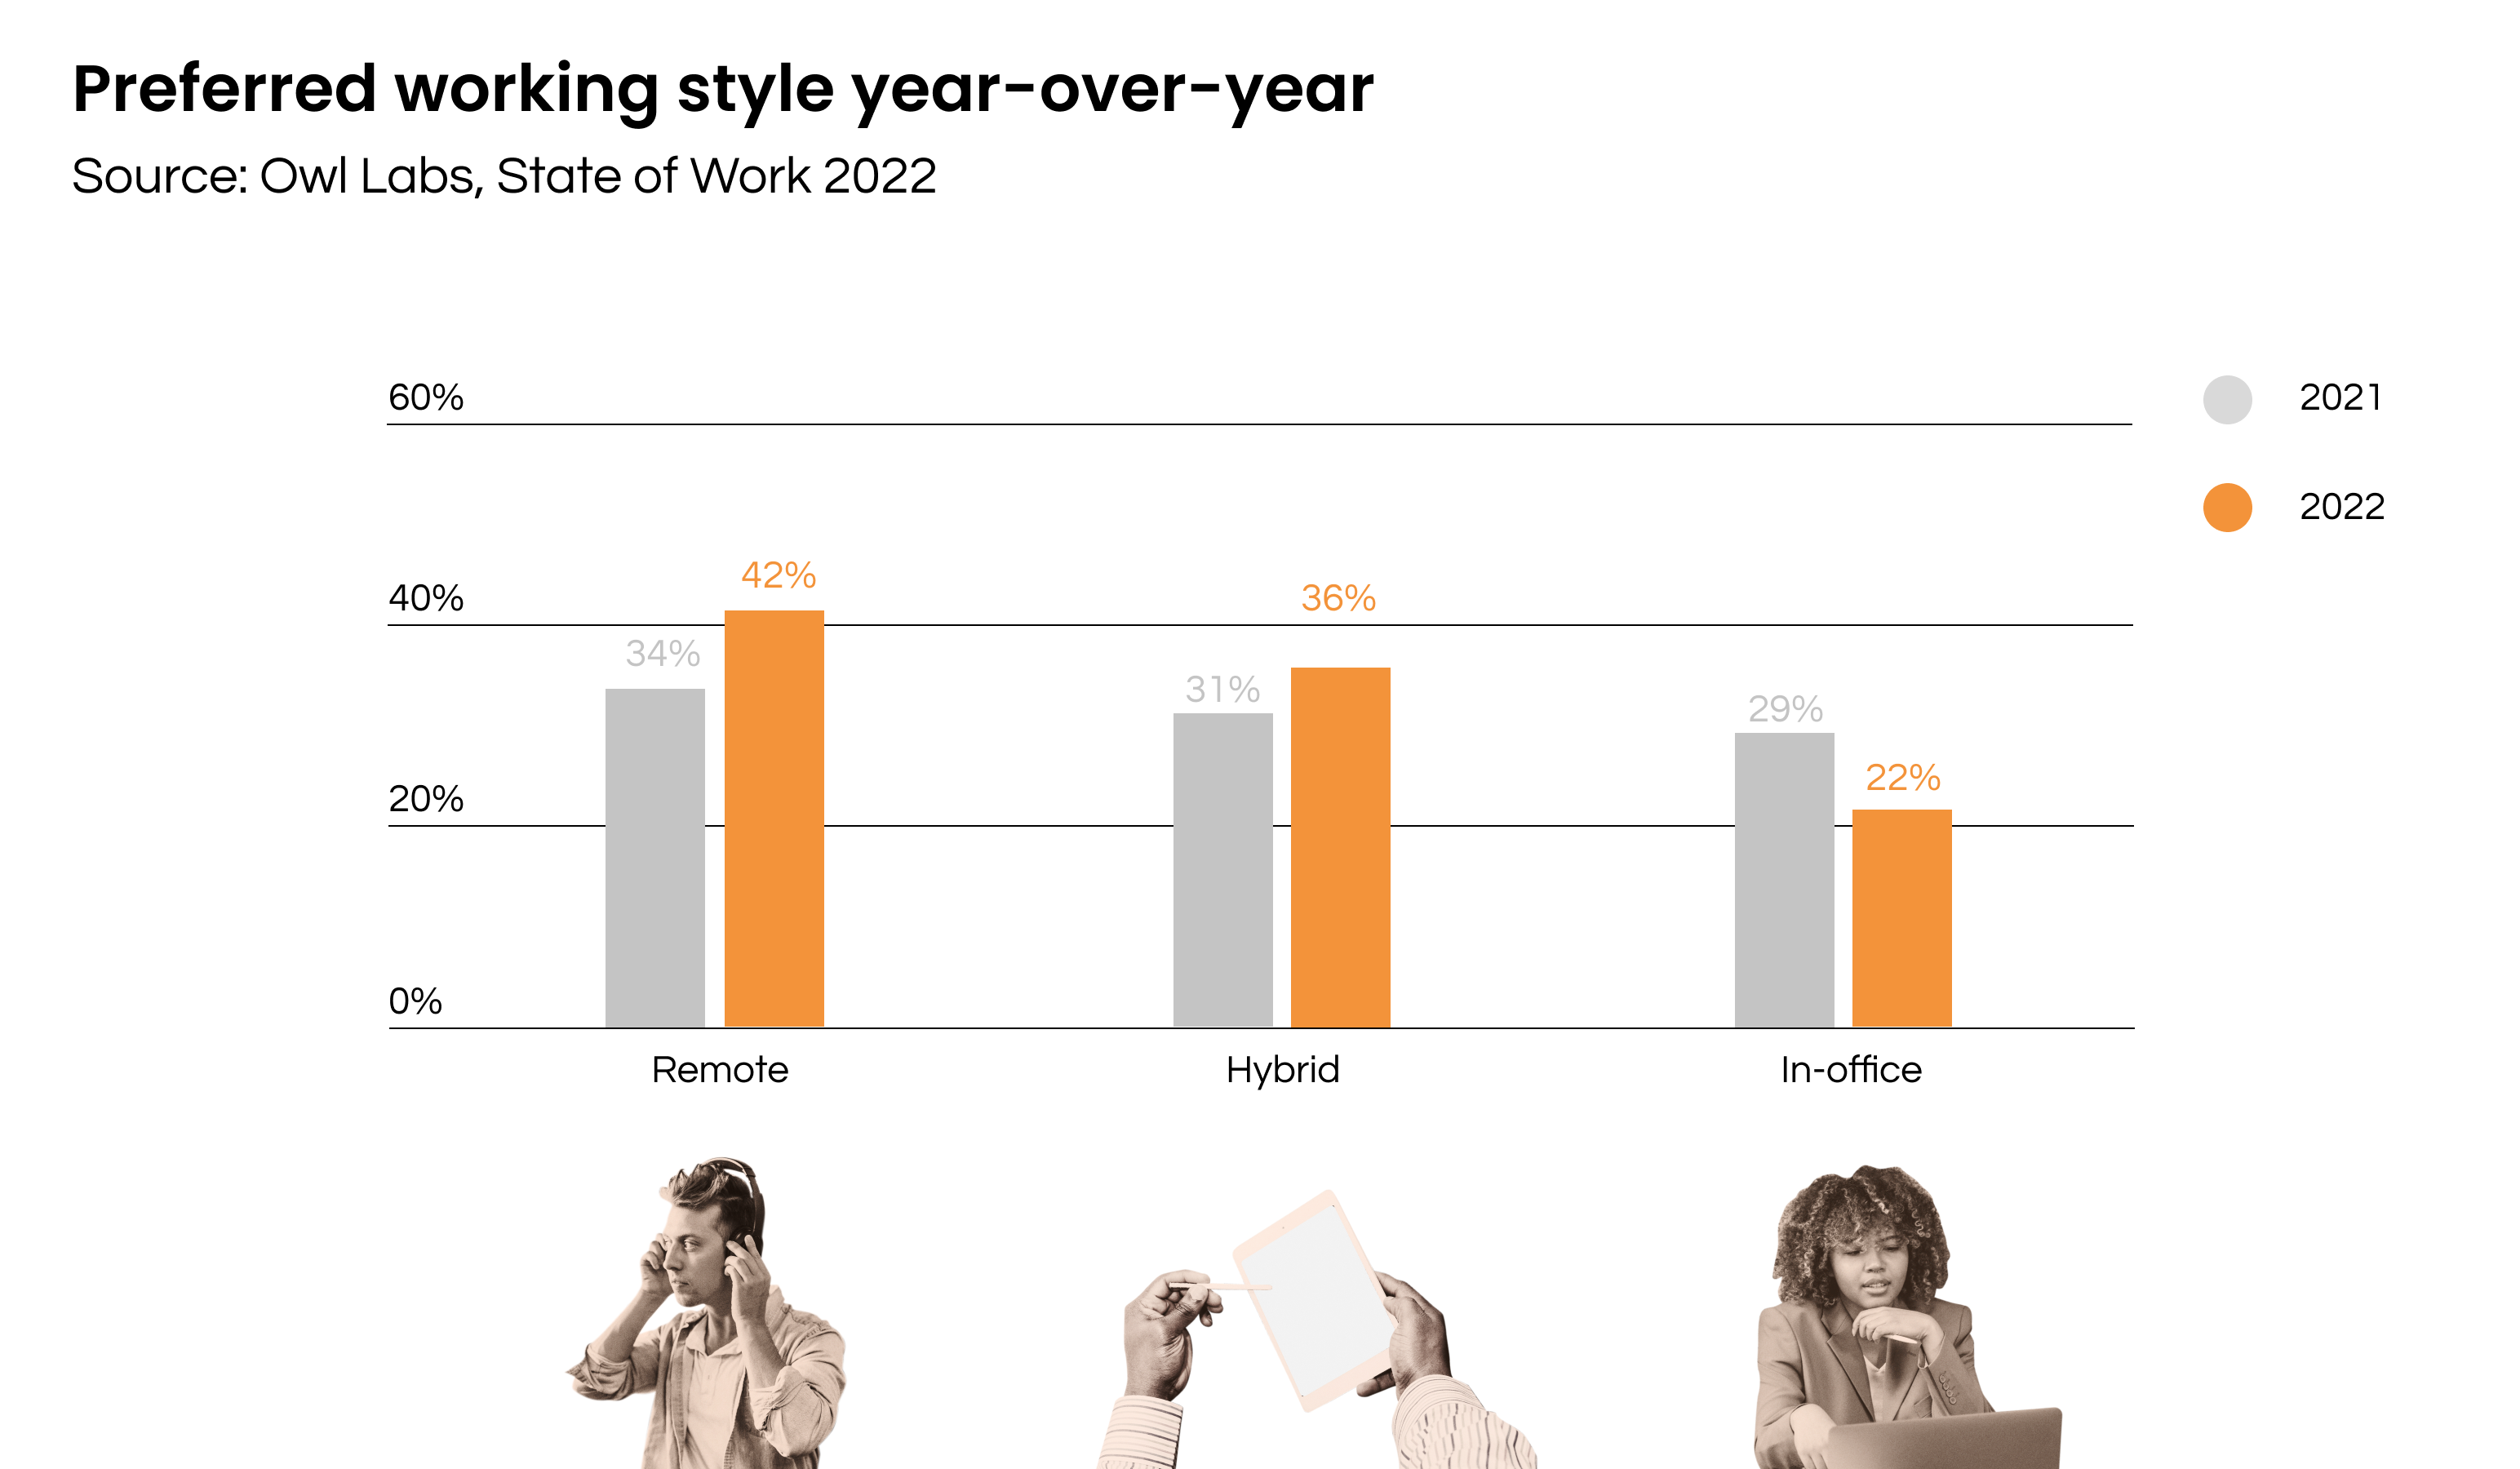 Figure 4. Preferred working style year-over-year